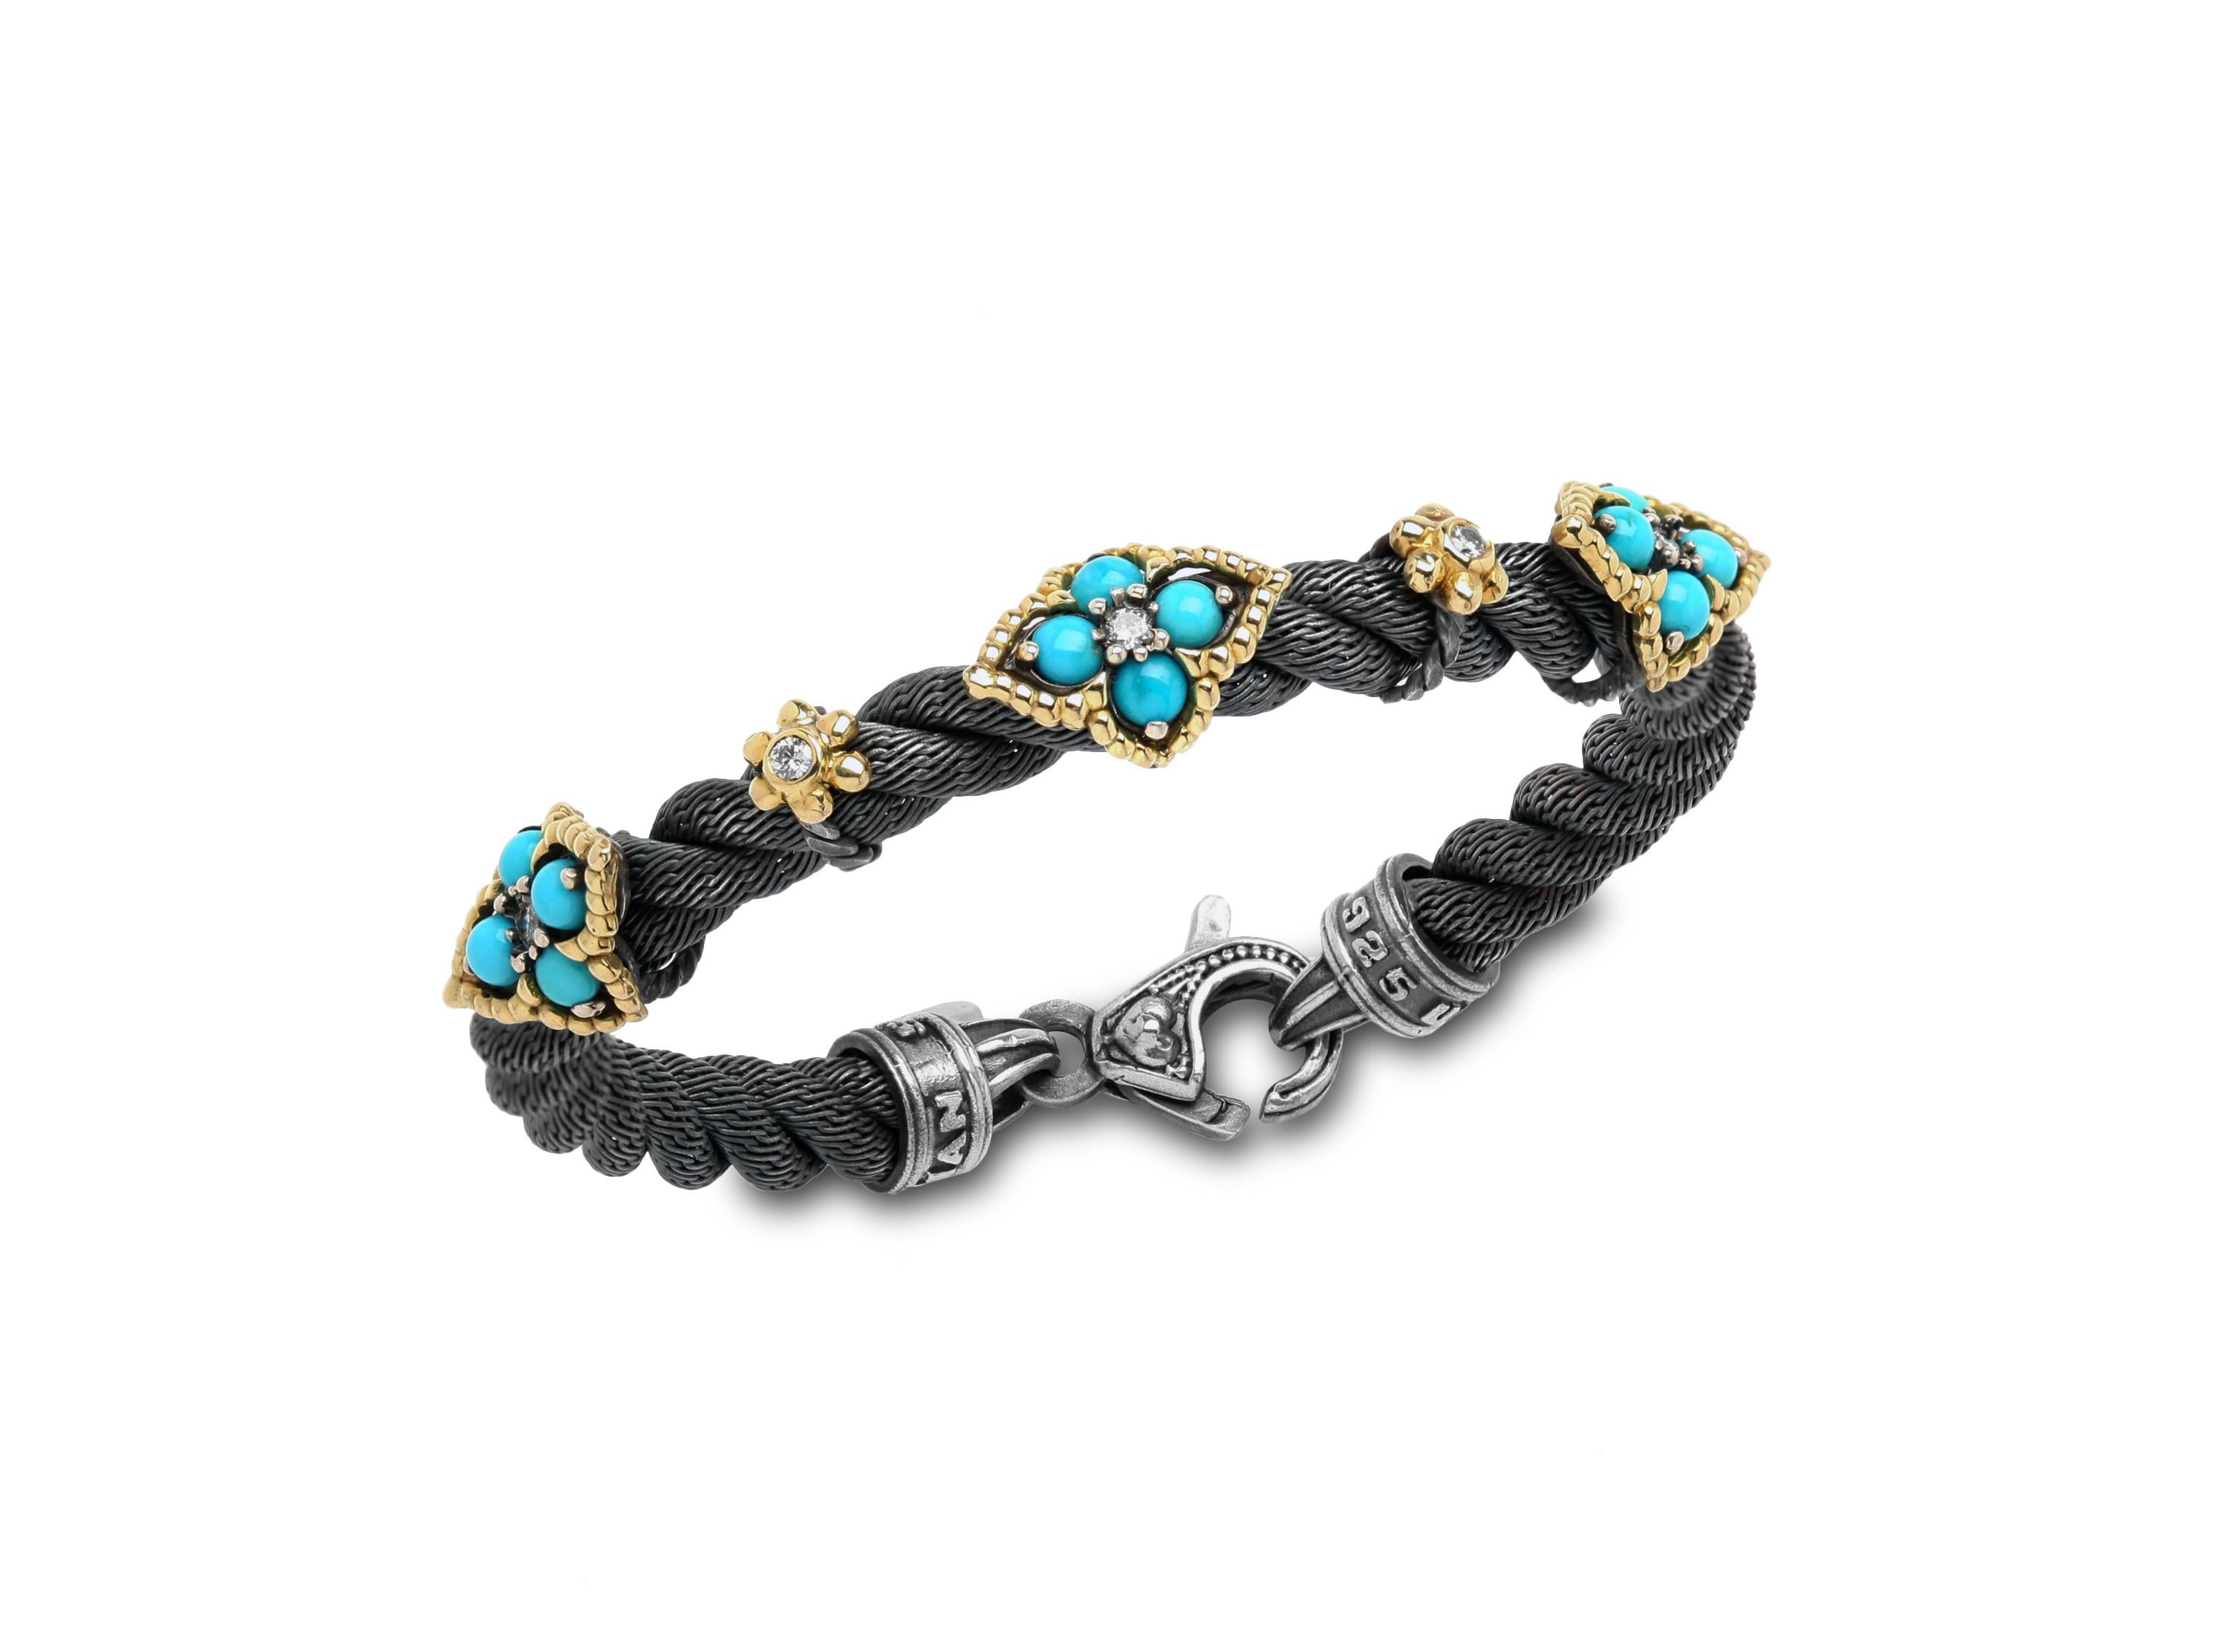 Stambolian Aged Silver 18K Gold Cable Bracelet Sleeping Beauty Turquoise Diamond

This unique bracelet features three sections of Turquoise with four stones in each with a diamond in the center AND two sections of diamond bezels set in yellow